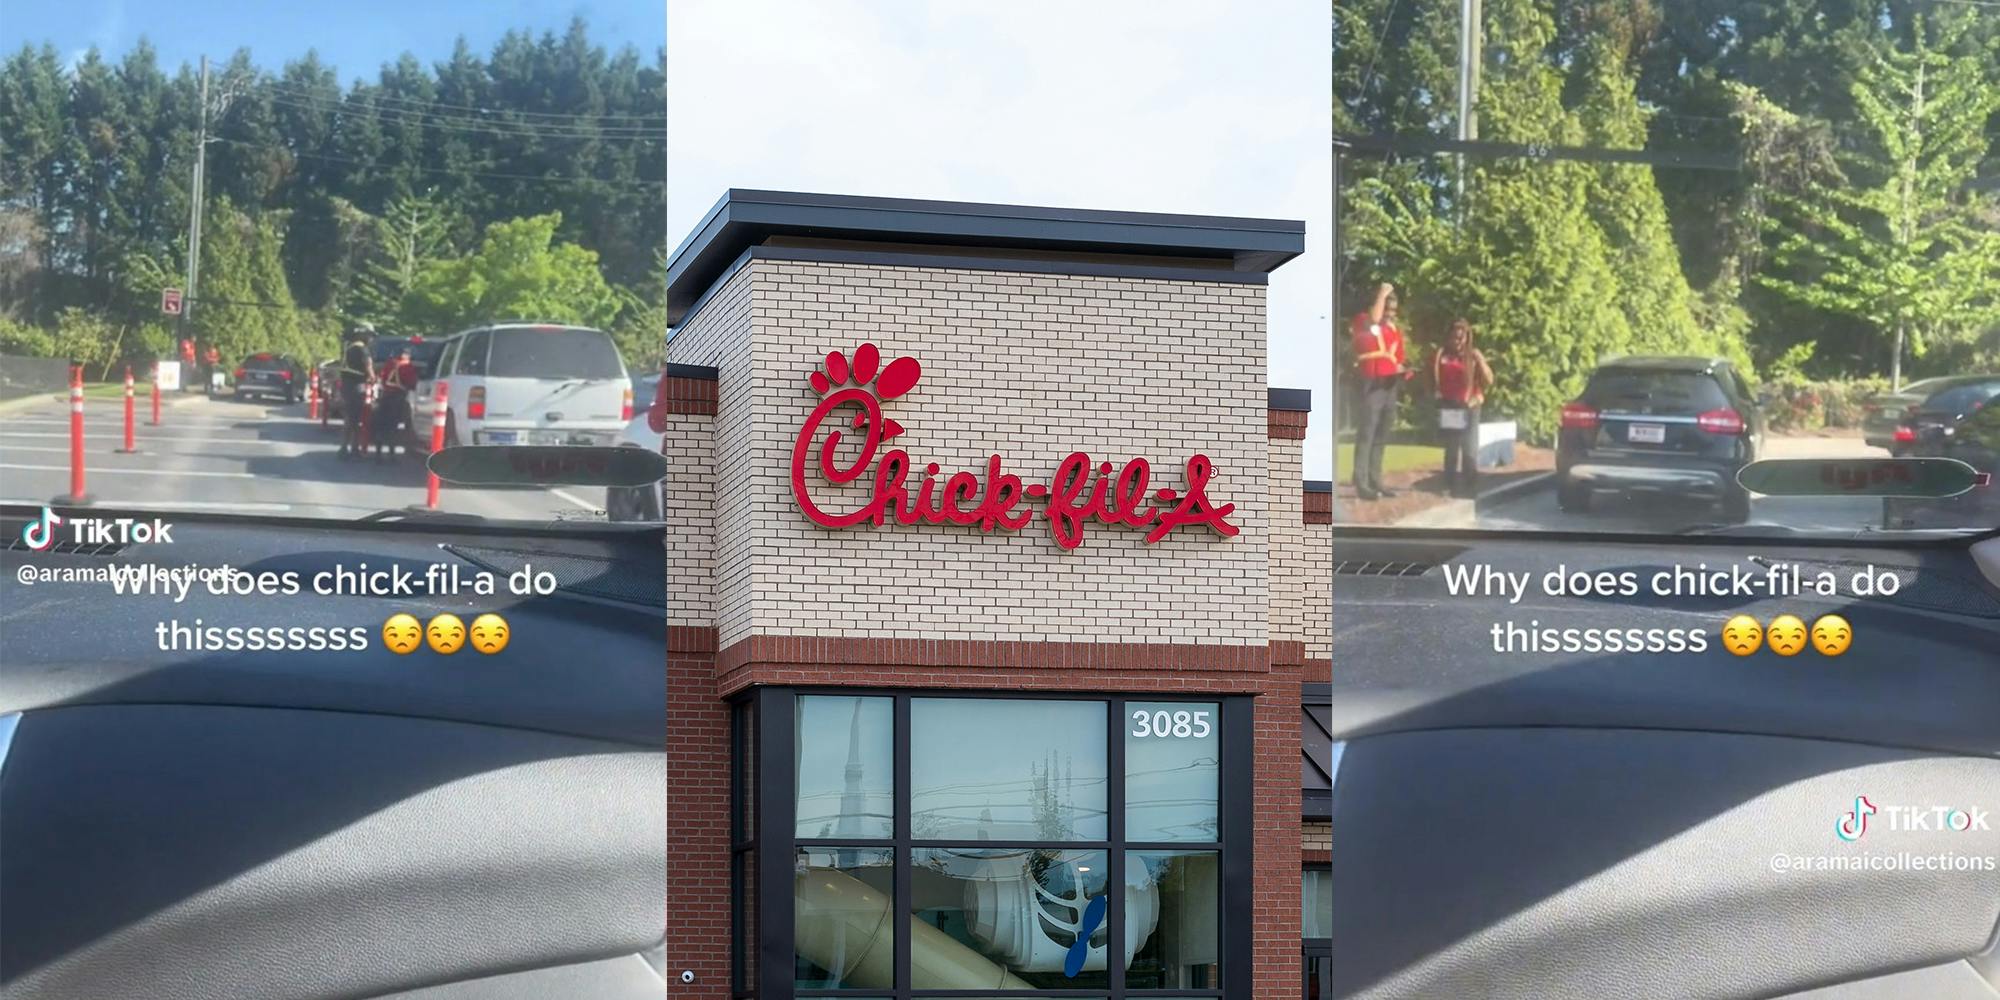 Chick-fil-A customer questions why drive-thru customers are made to order without being able to look at menu